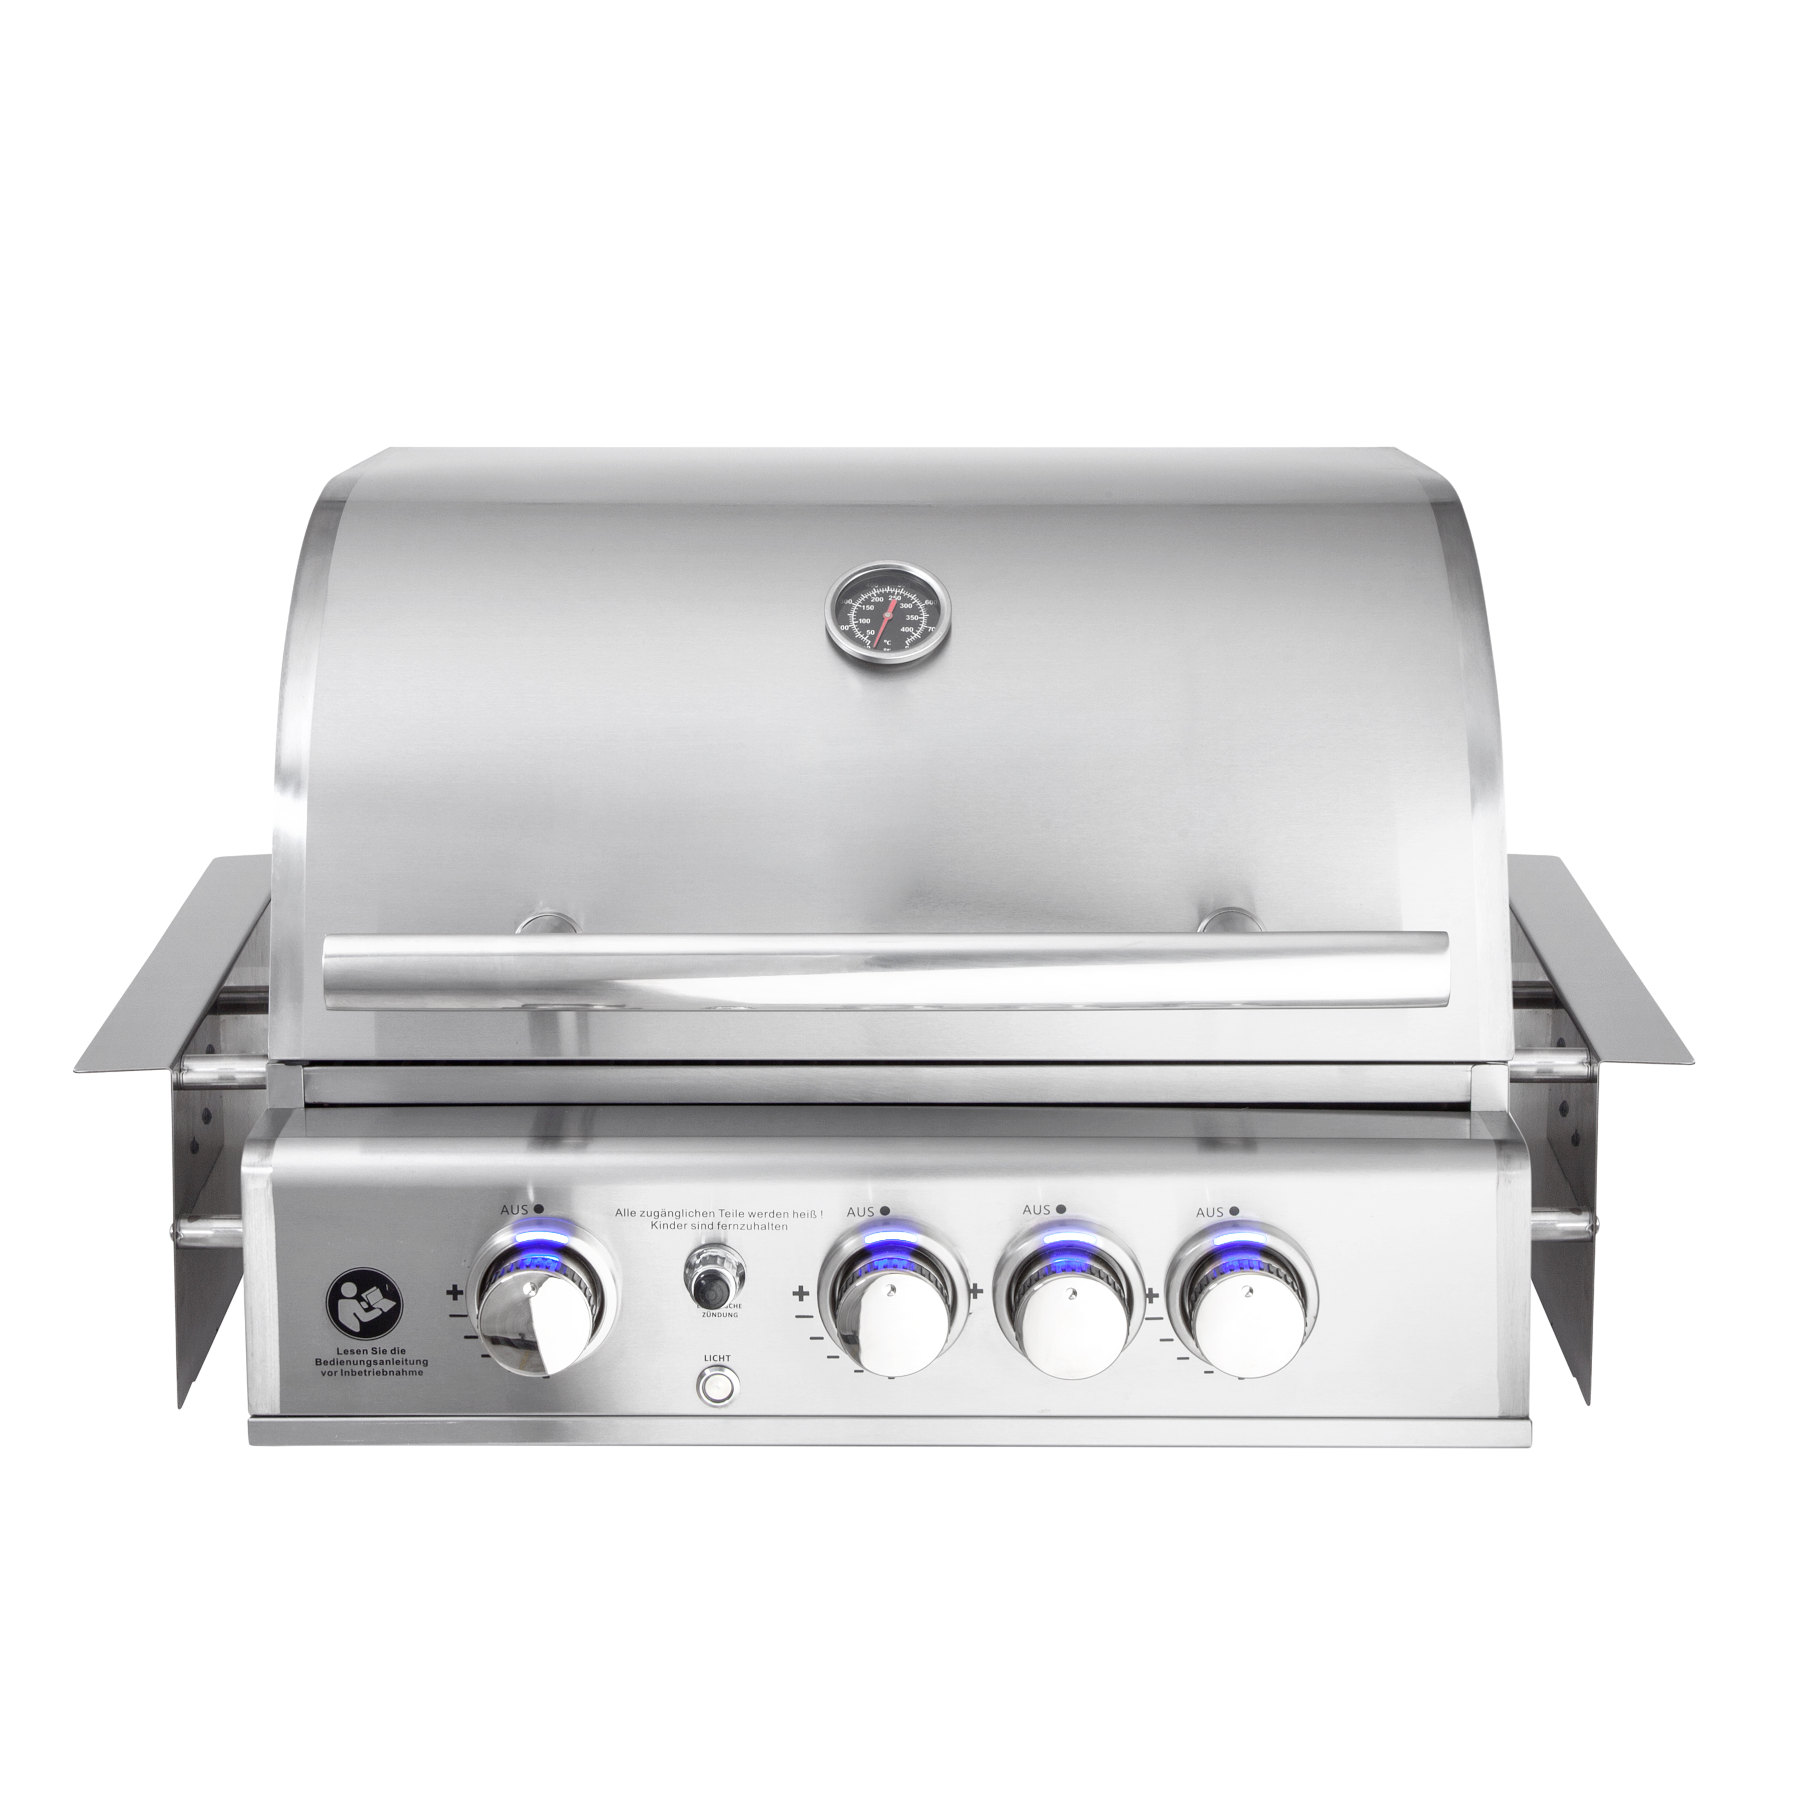 TOP-LINE - ALL'GRILL CHEF "M" - BUILT-IN mit Air System